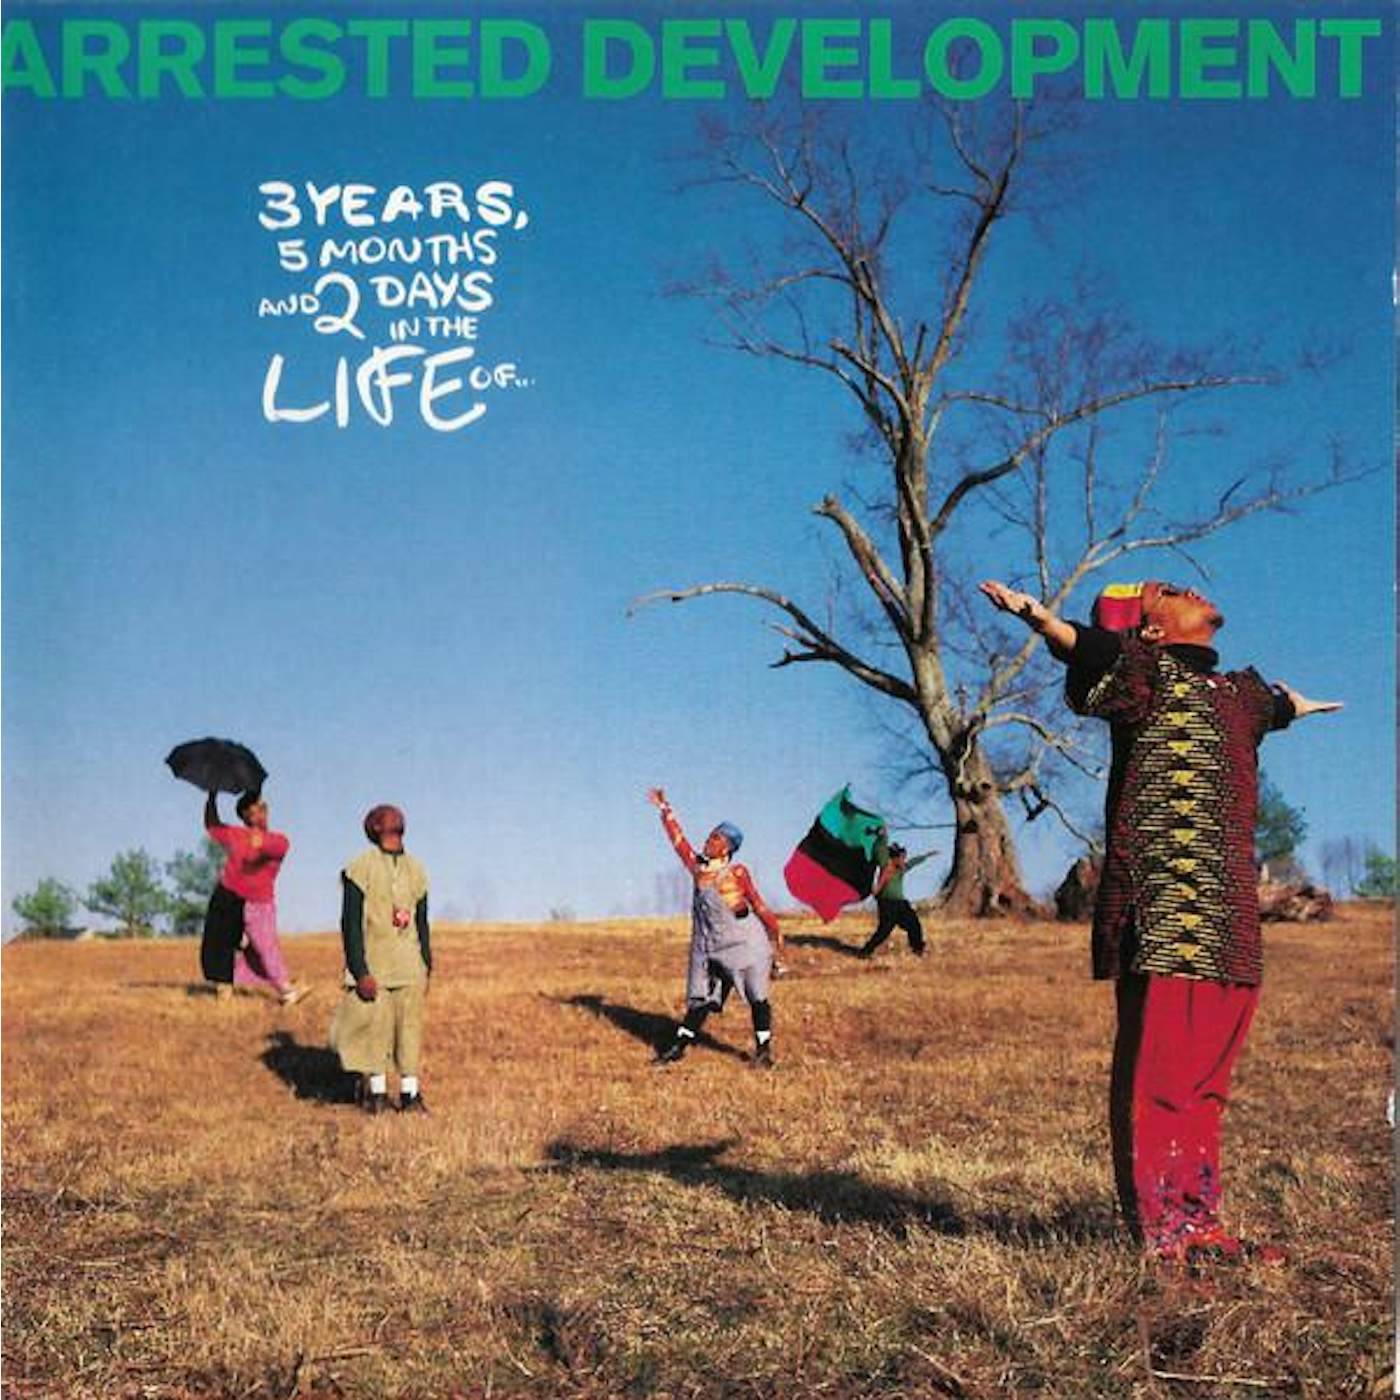 Arrested Development 3 YEARS 5 MONTHS & 2 DAYS IN LIFE CD